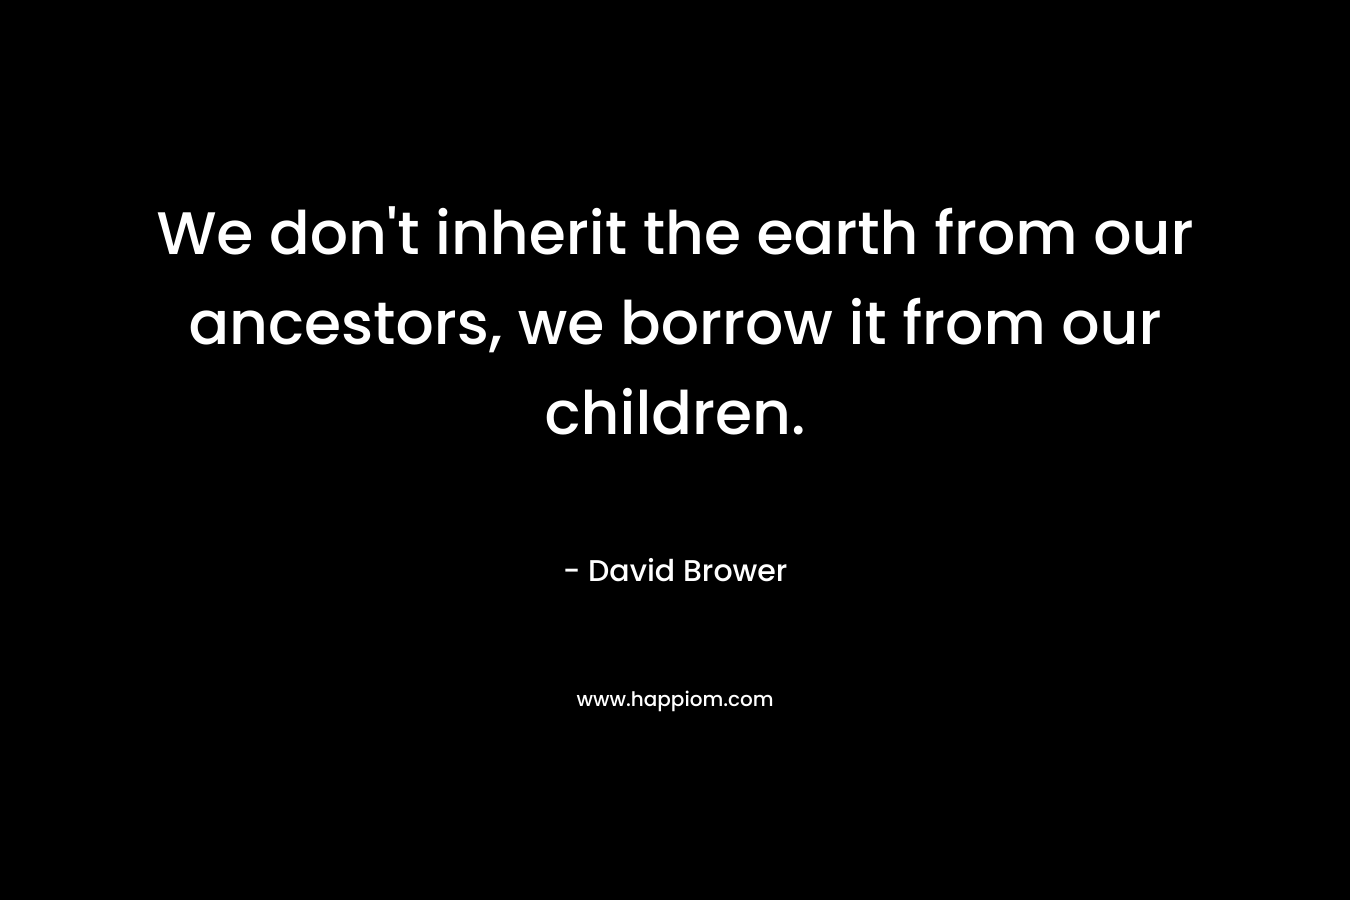 We don’t inherit the earth from our ancestors, we borrow it from our children. – David Brower